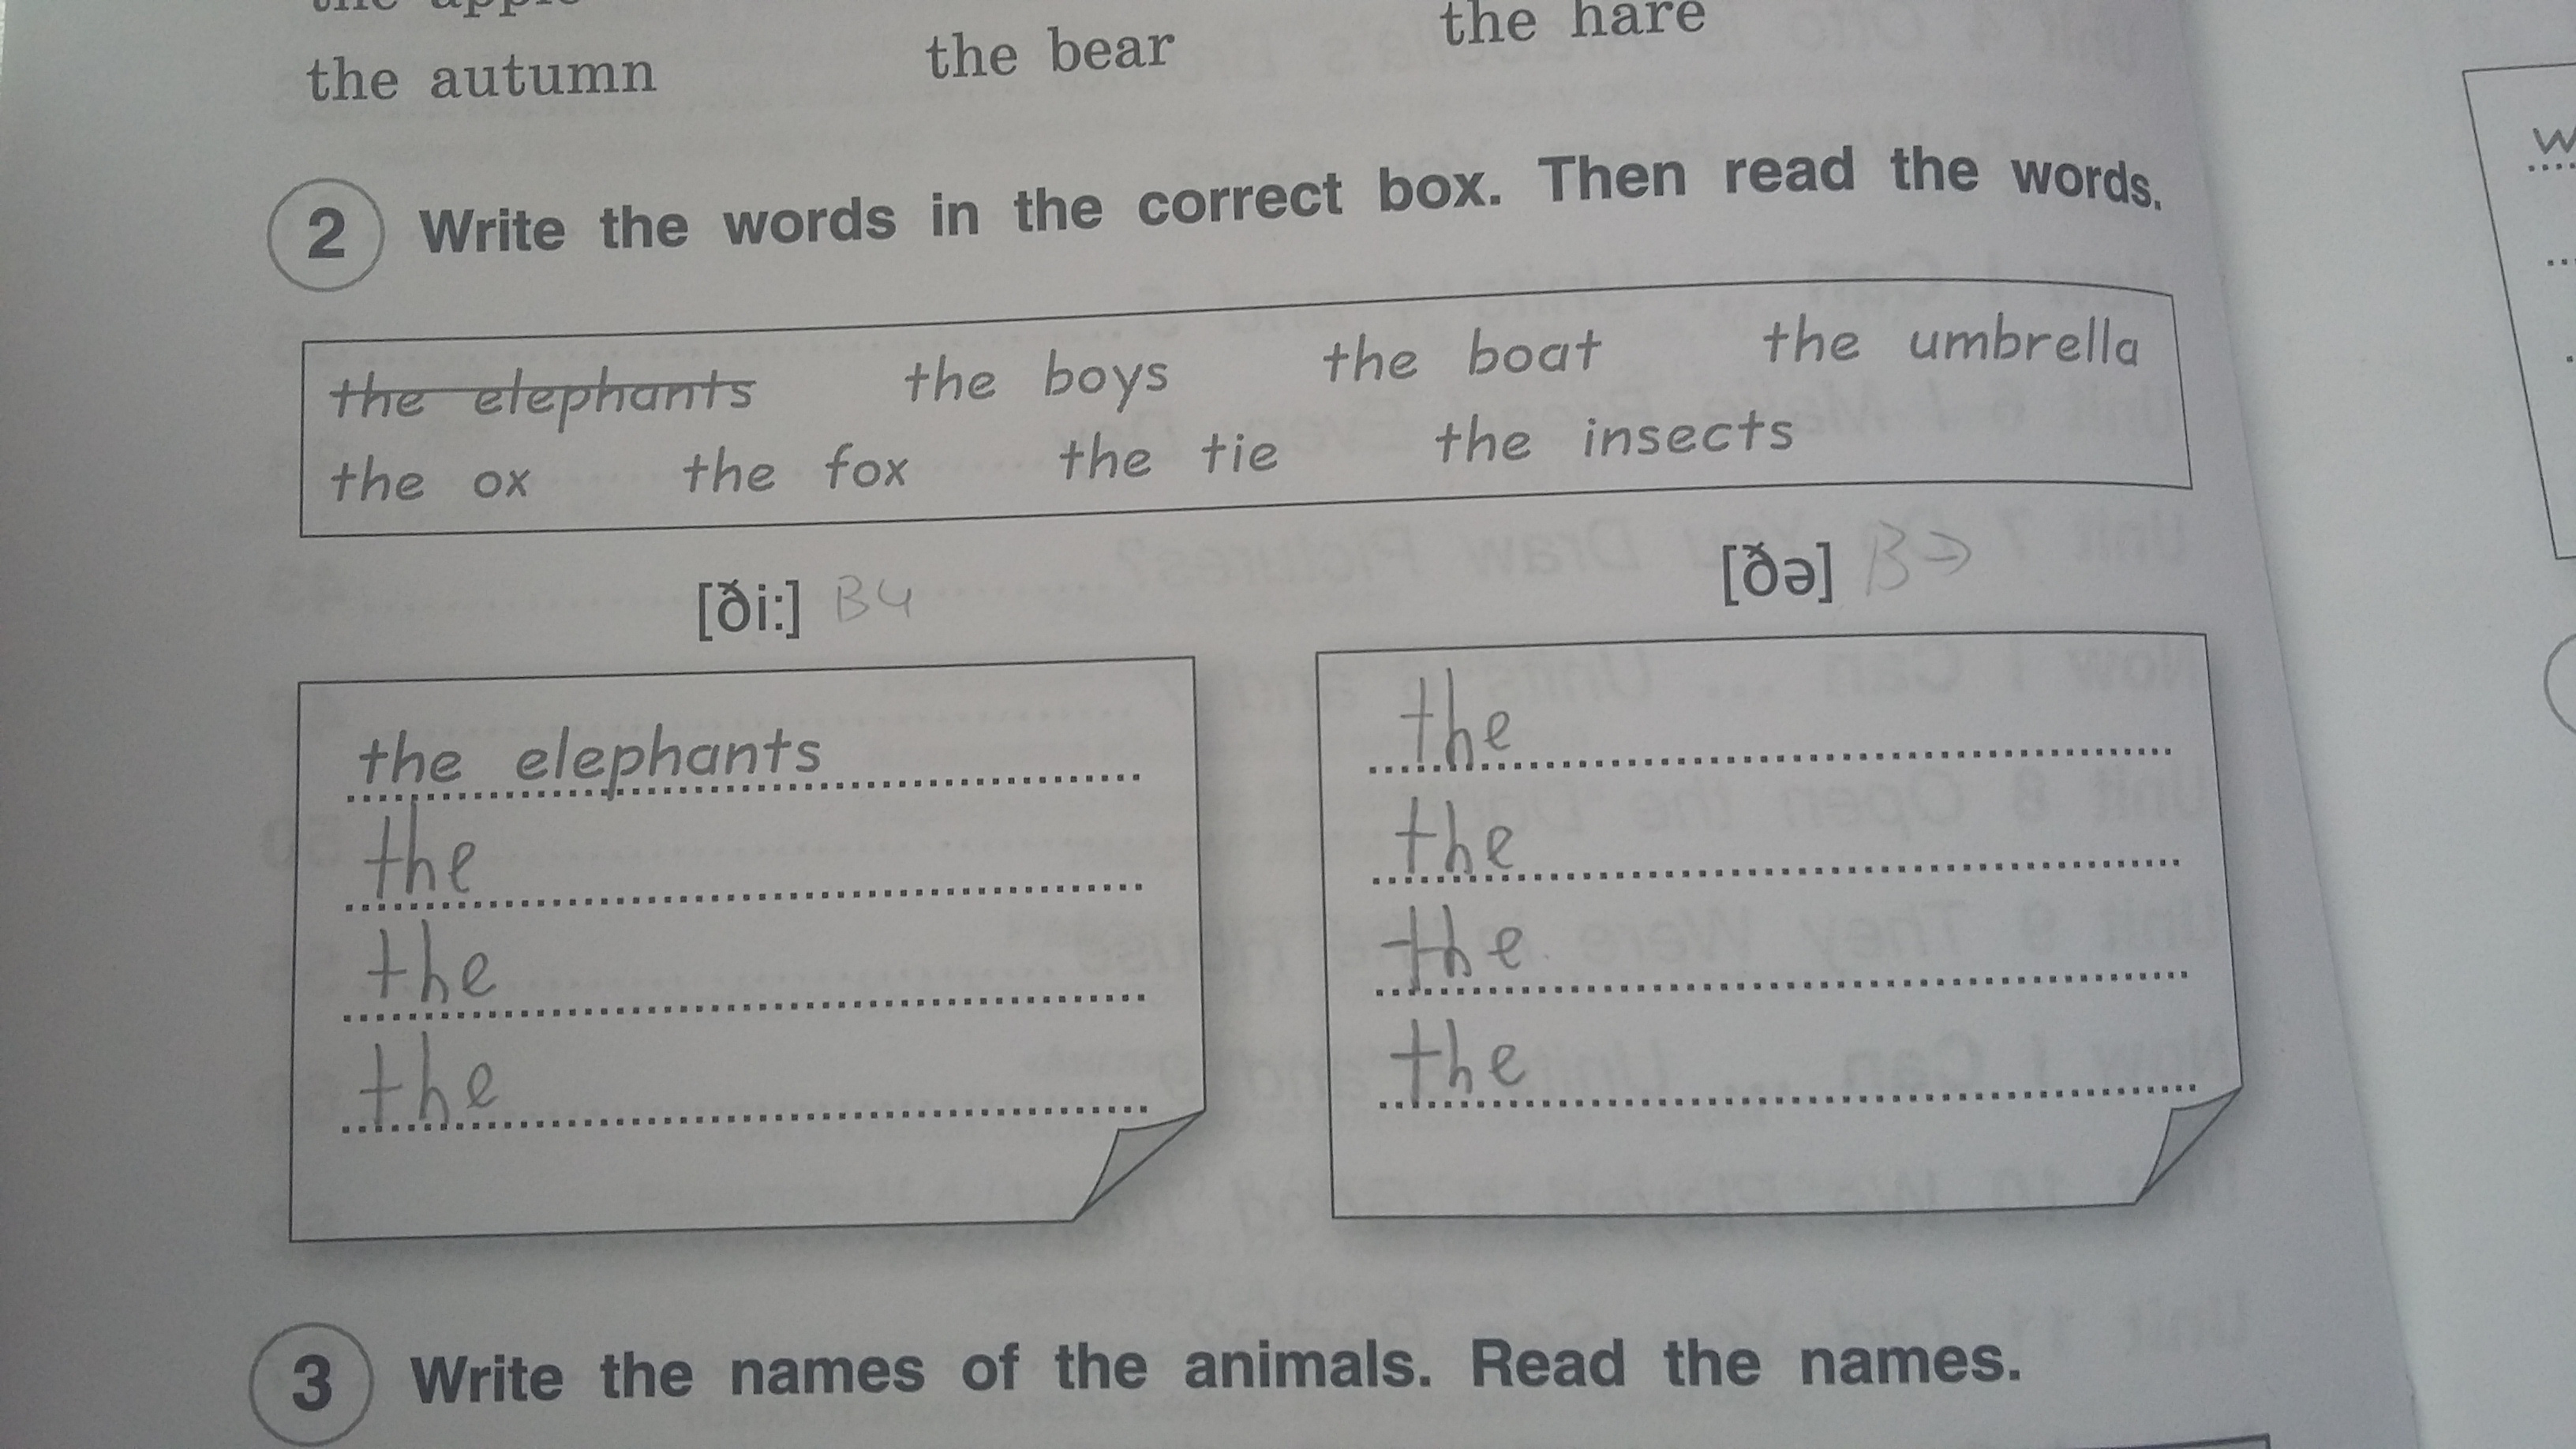 Write the words in correct box